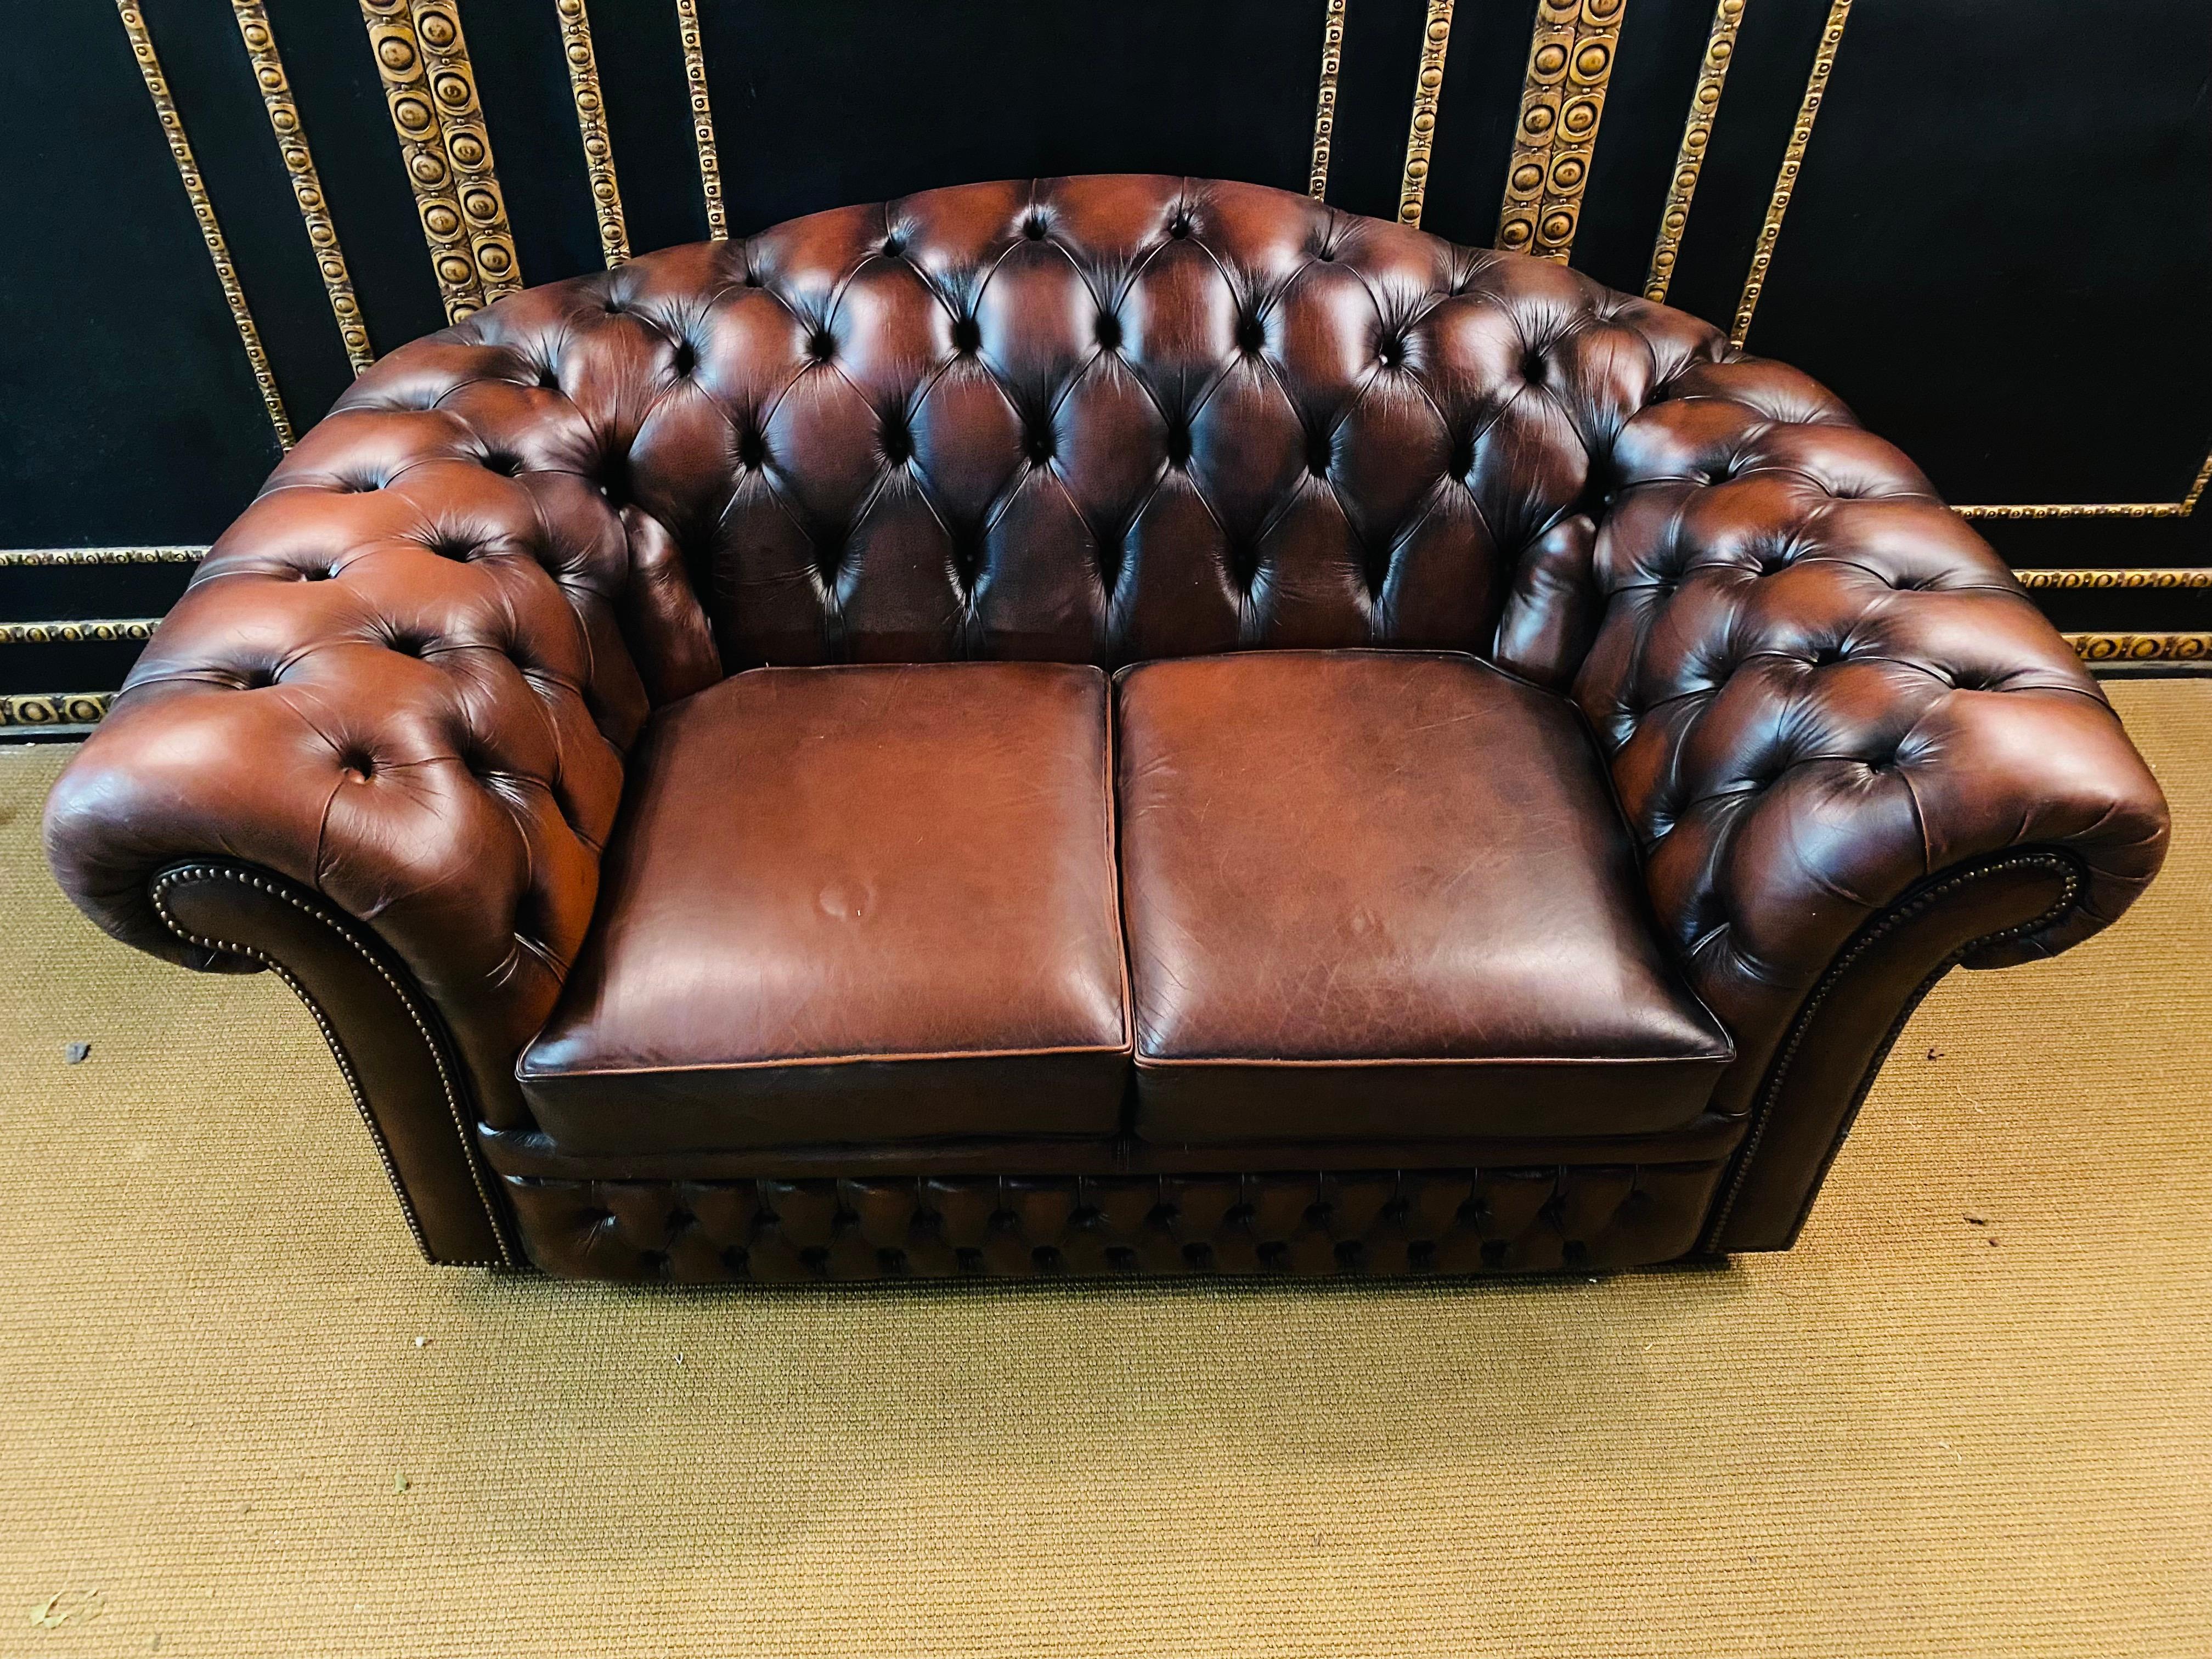 Very well-kept Chesterfield sofa. This model was made by the company Centurion, the company is a traditional manufactory which is known for its quality. The sofa is in a vintage condition.
But over the years it has Gotten a bit more character. We